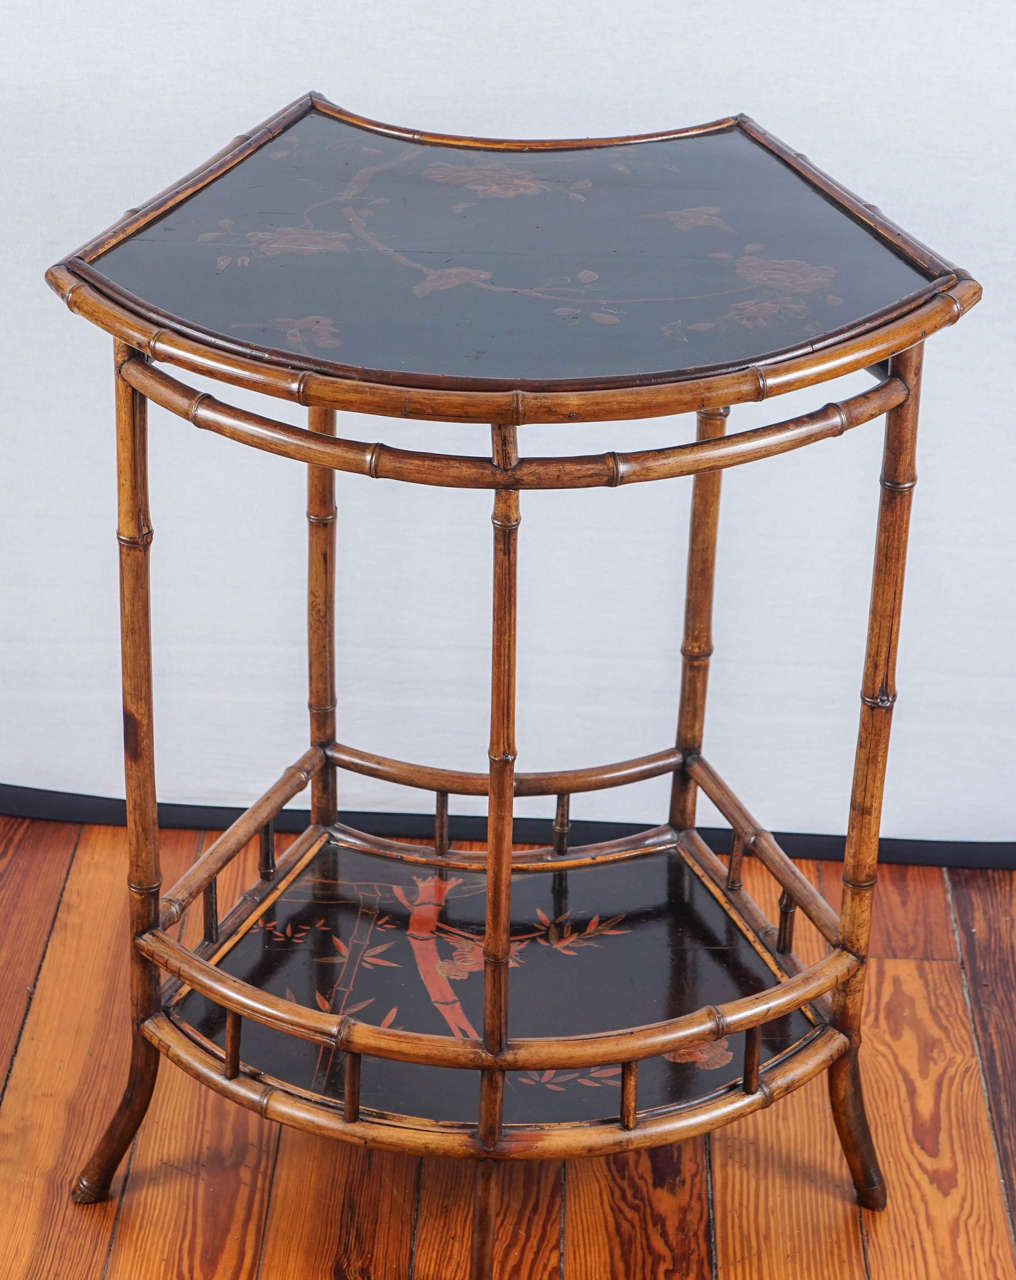 Edwardian-style bamboo and Japanese lacquer two-tier concave front
table. Red flowering tree decoration on both tiers.  Probably created for
the Anglo-Indian market.